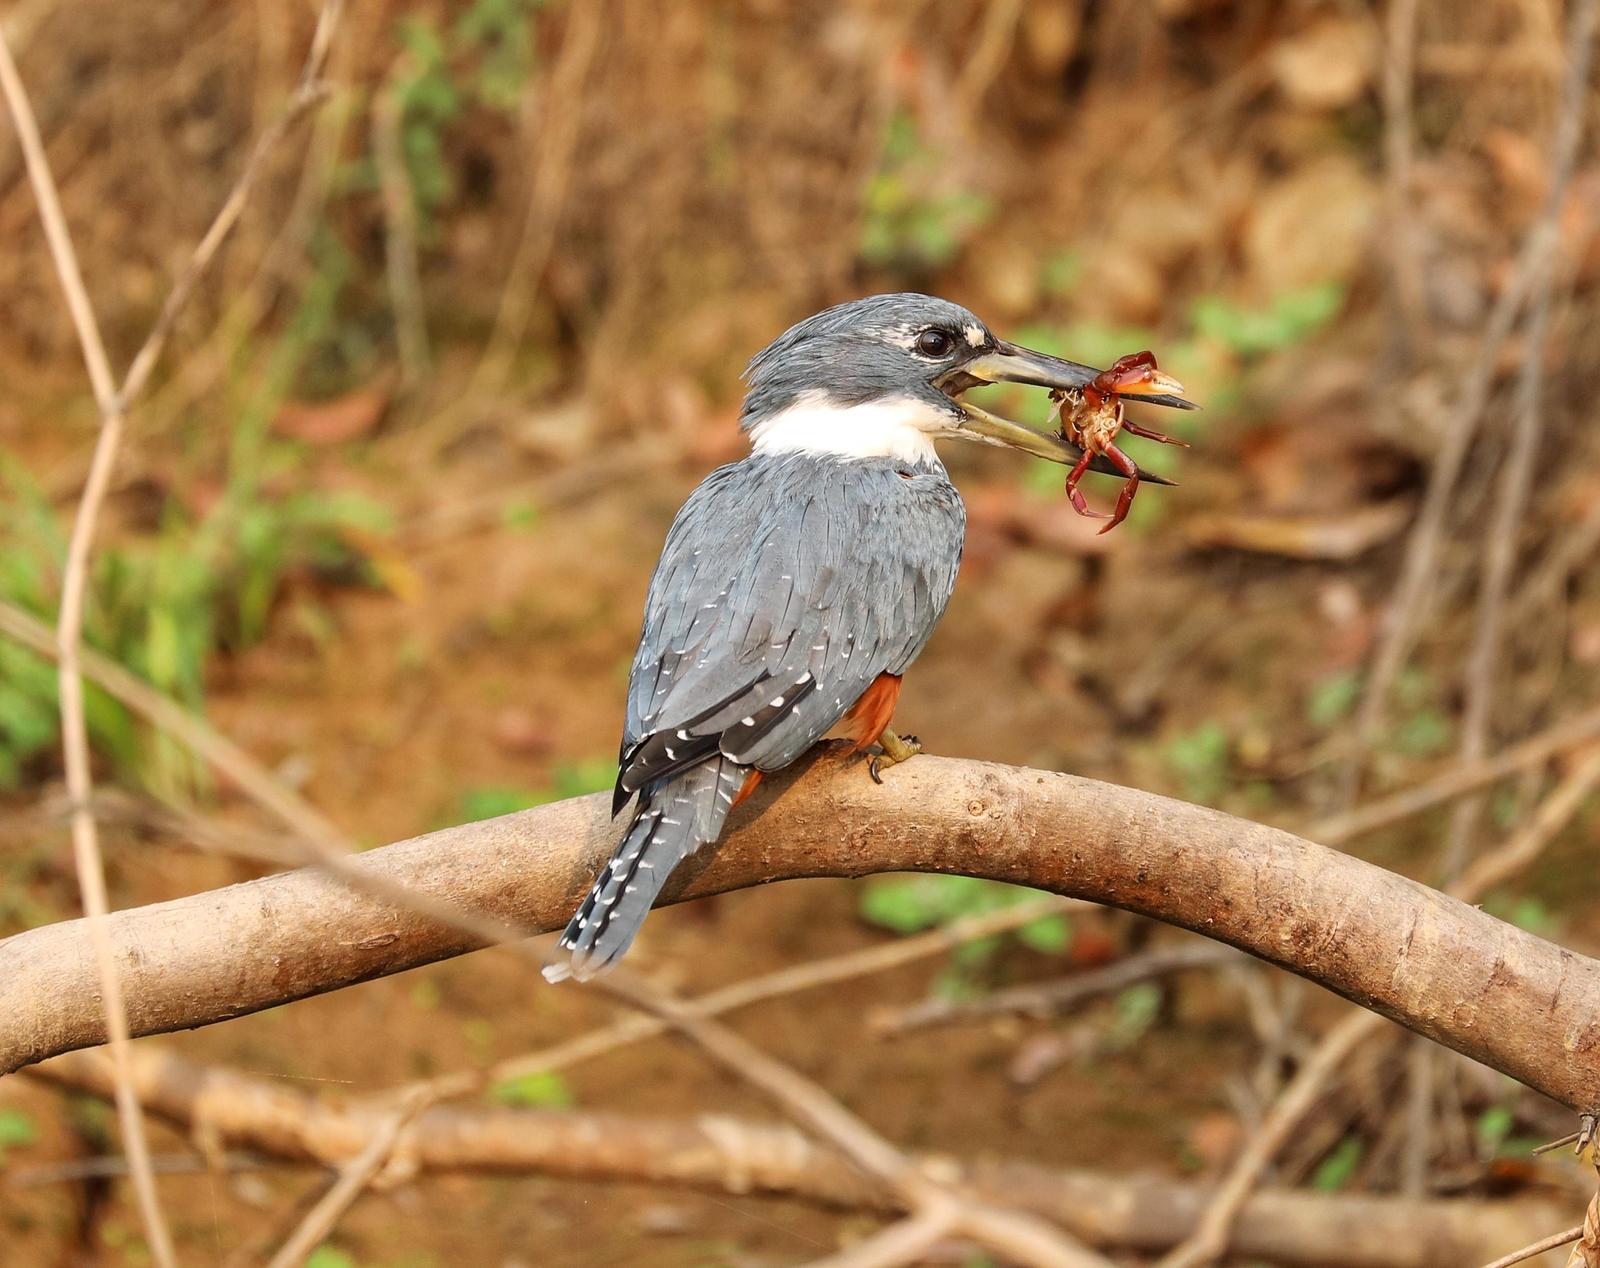 Ringed Kingfisher Photo by Debbie Reynolds